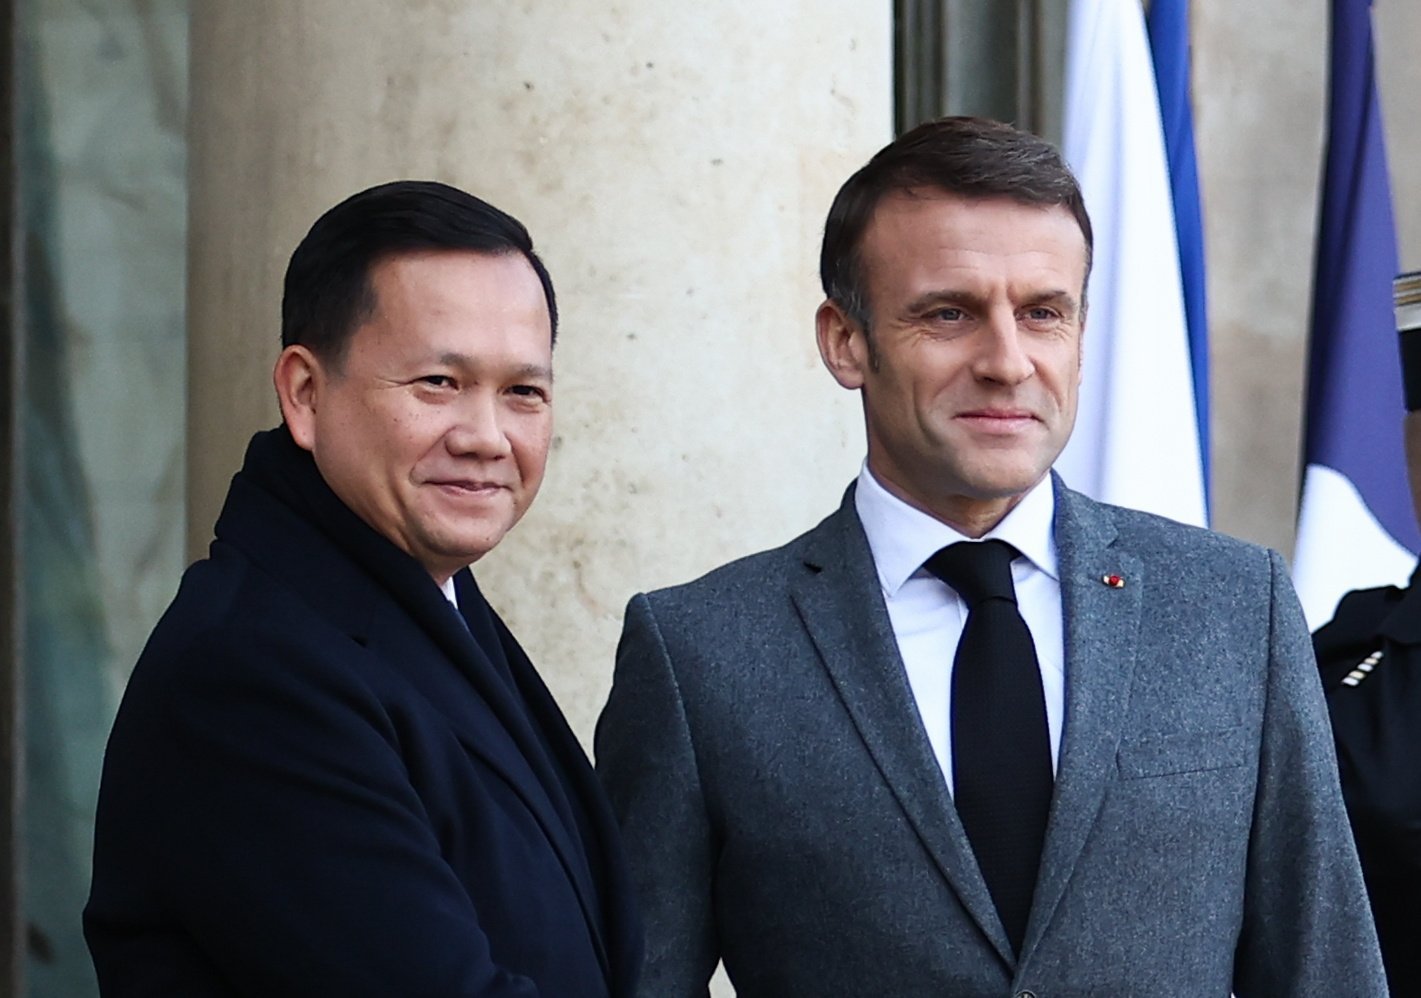 French President Emmanuel Macron (right) receives Cambodian Prime Minister Hun Manet prior to their meeting at the Elysee Palace in Paris, France, on Thursday. Photo: EPA-EFE